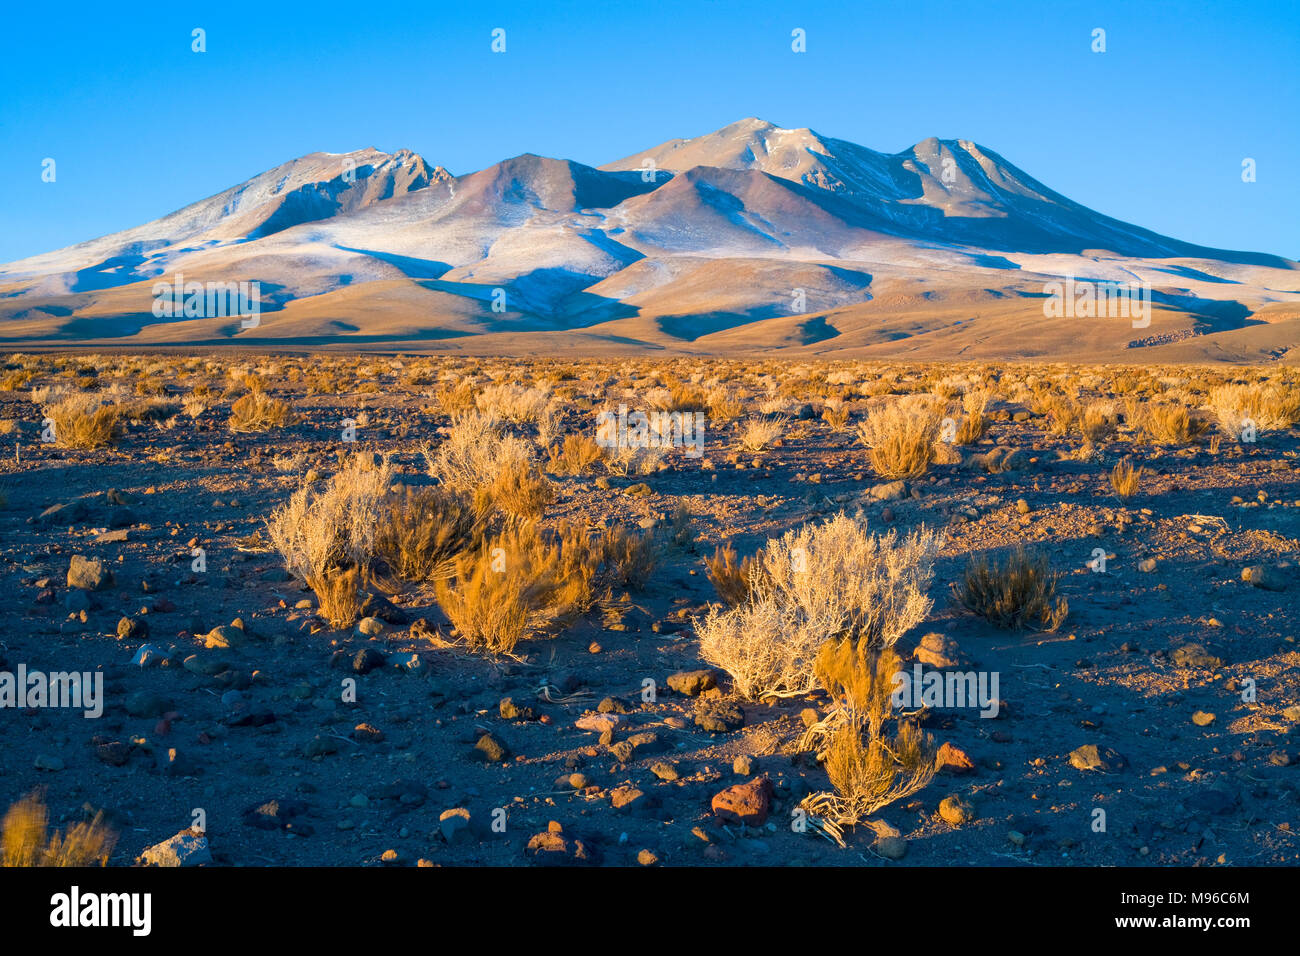 Hills in the Altiplano (High Andean plateau), Atacama desert, Chile, South America Stock Photo